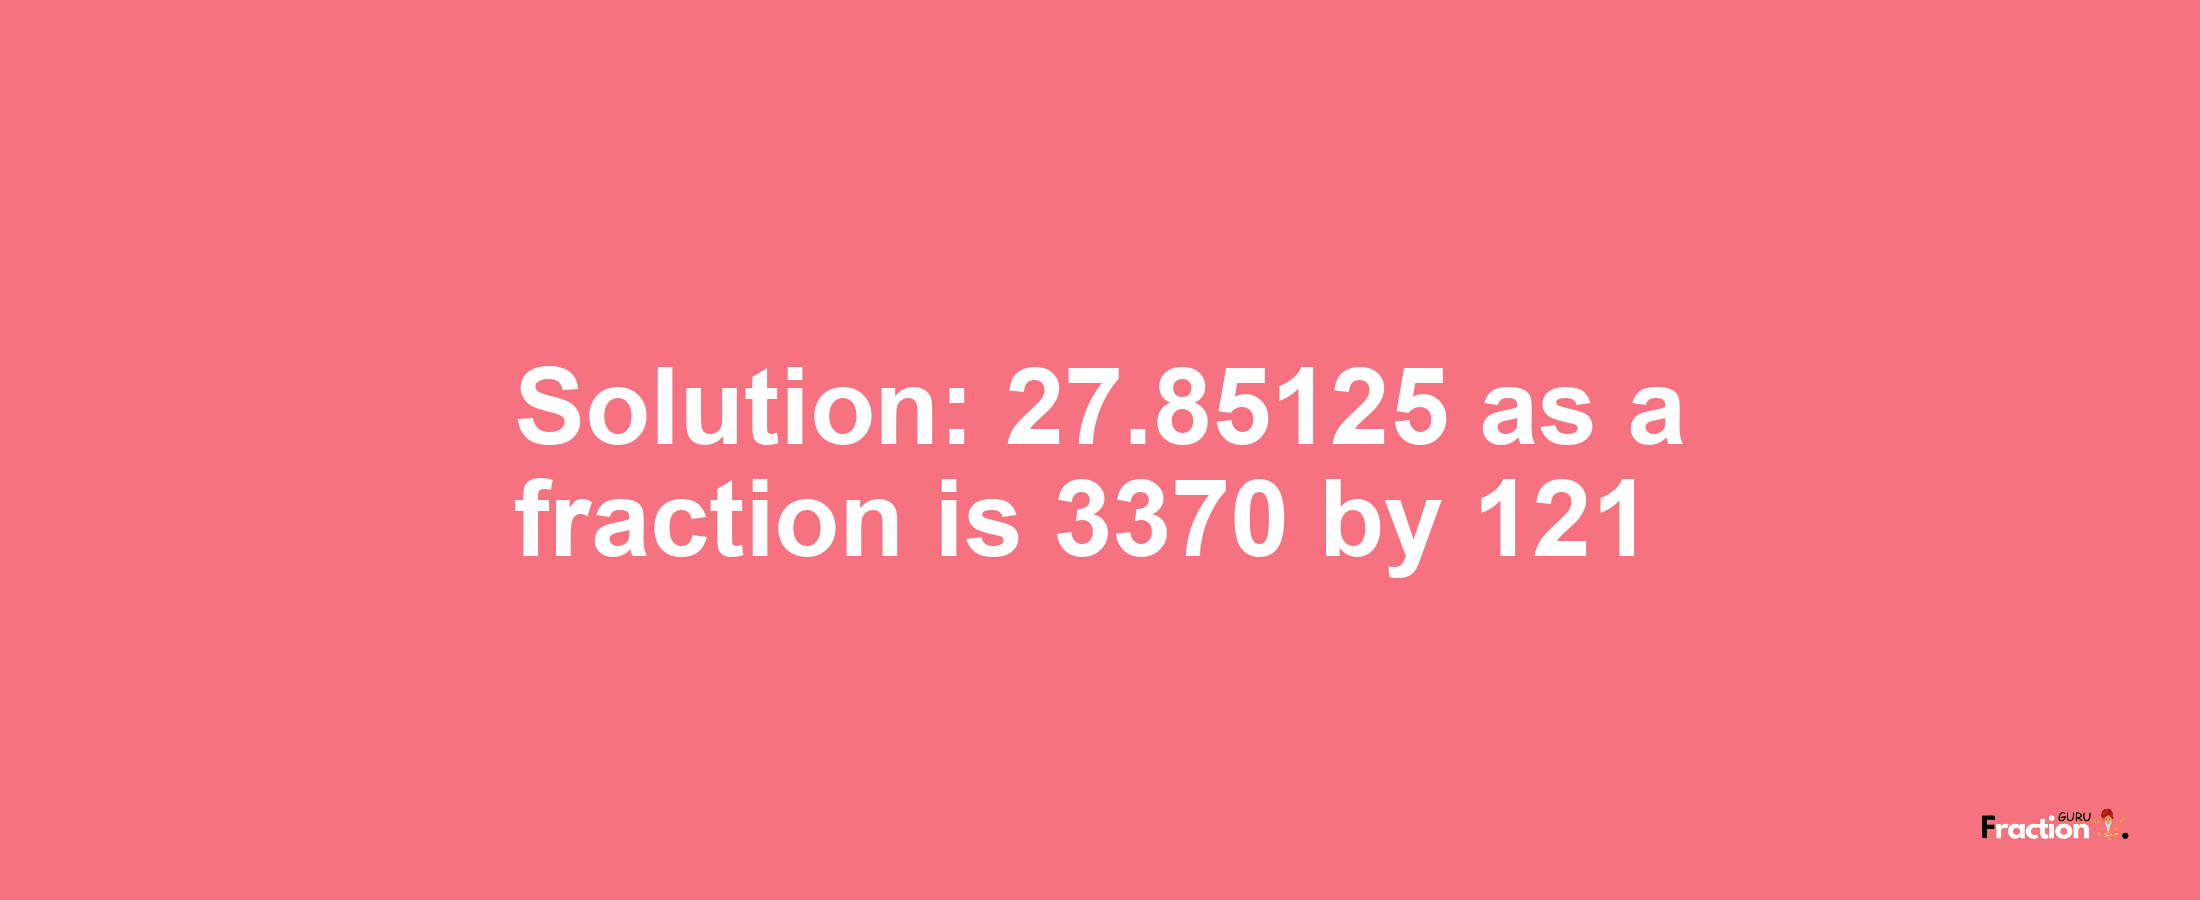 Solution:27.85125 as a fraction is 3370/121